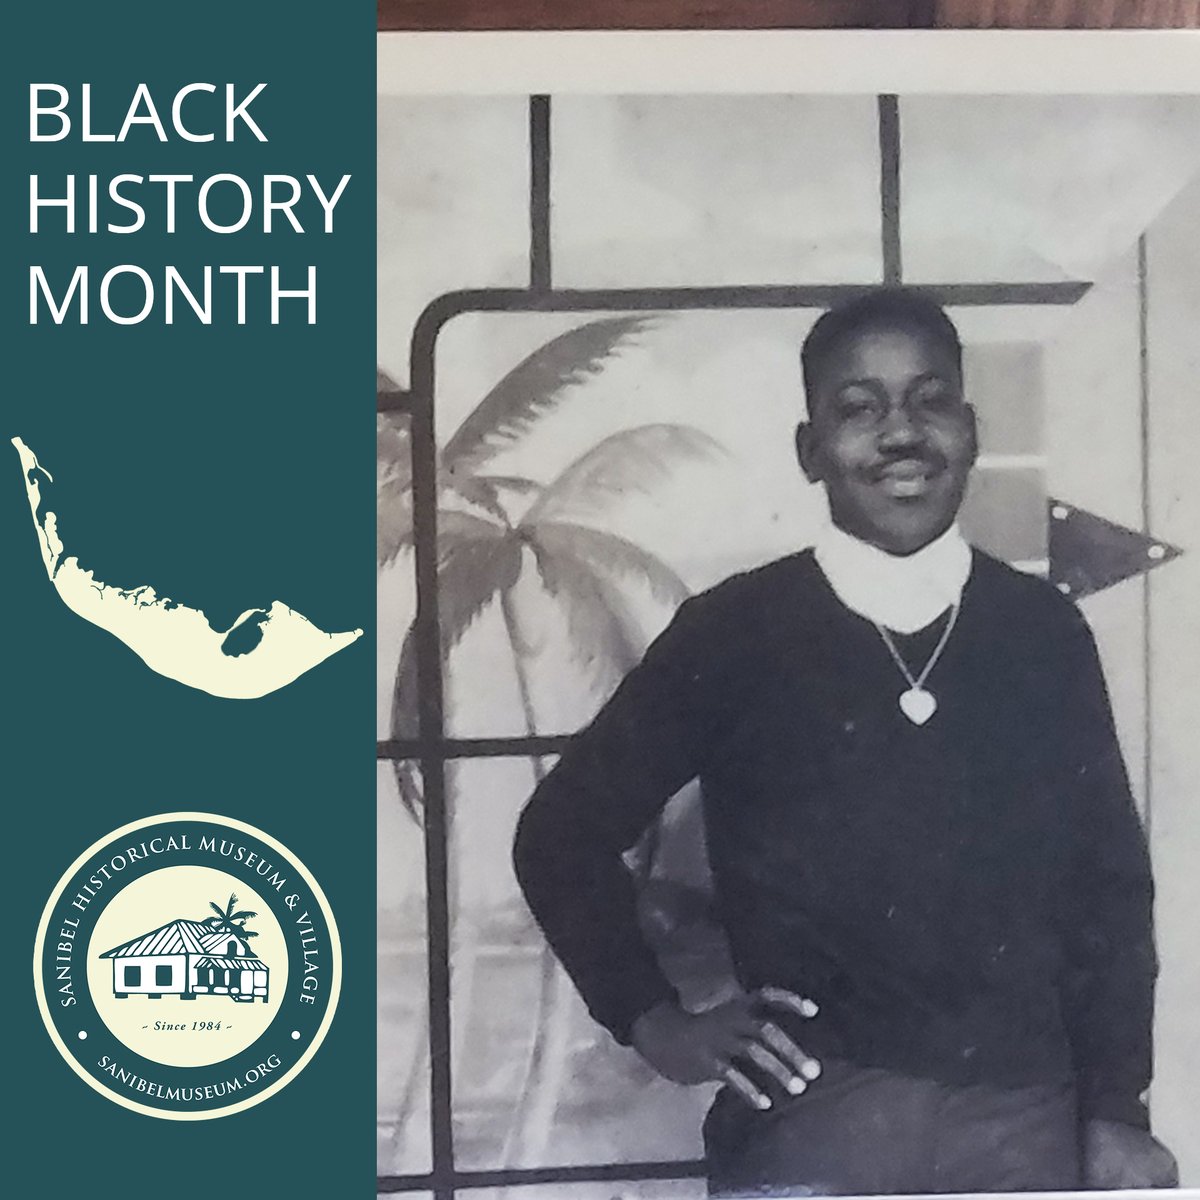 The Gavins originally came to Sanibel to sharecrop on the island’s rich and fertile soil and were the first black family to establish residency on Sanibel in 1917. 

#sanibel #captiva #blackhistorymonth #bhm #blackhistory #civilizationhistory #sanibelhistoricalmuseum